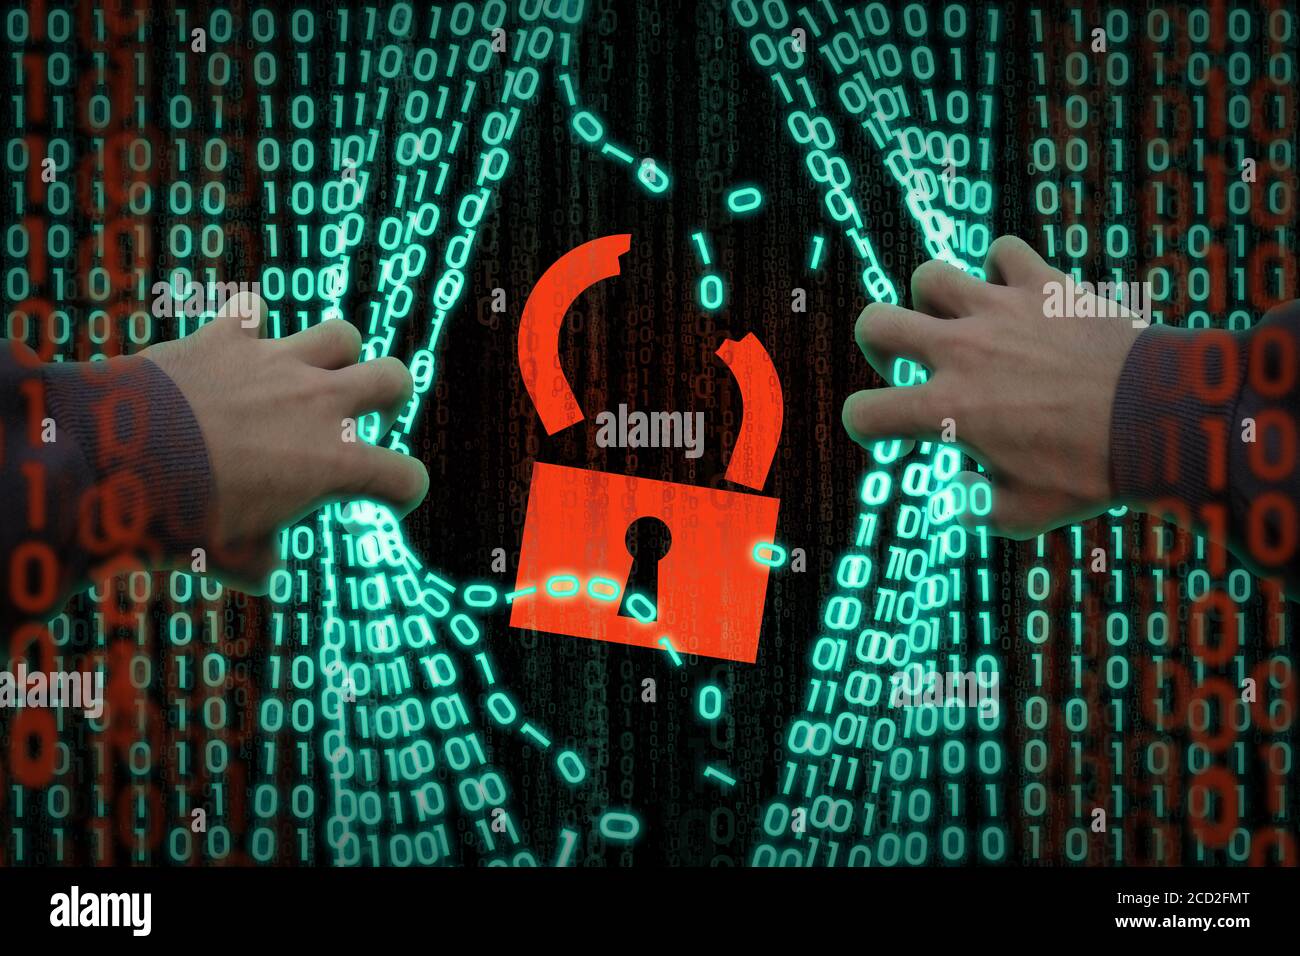 Hacker enters the computer, steals personal data. Hacking computer security system, firewall. Data security concept. Hacker hands tearing binary code Stock Photo